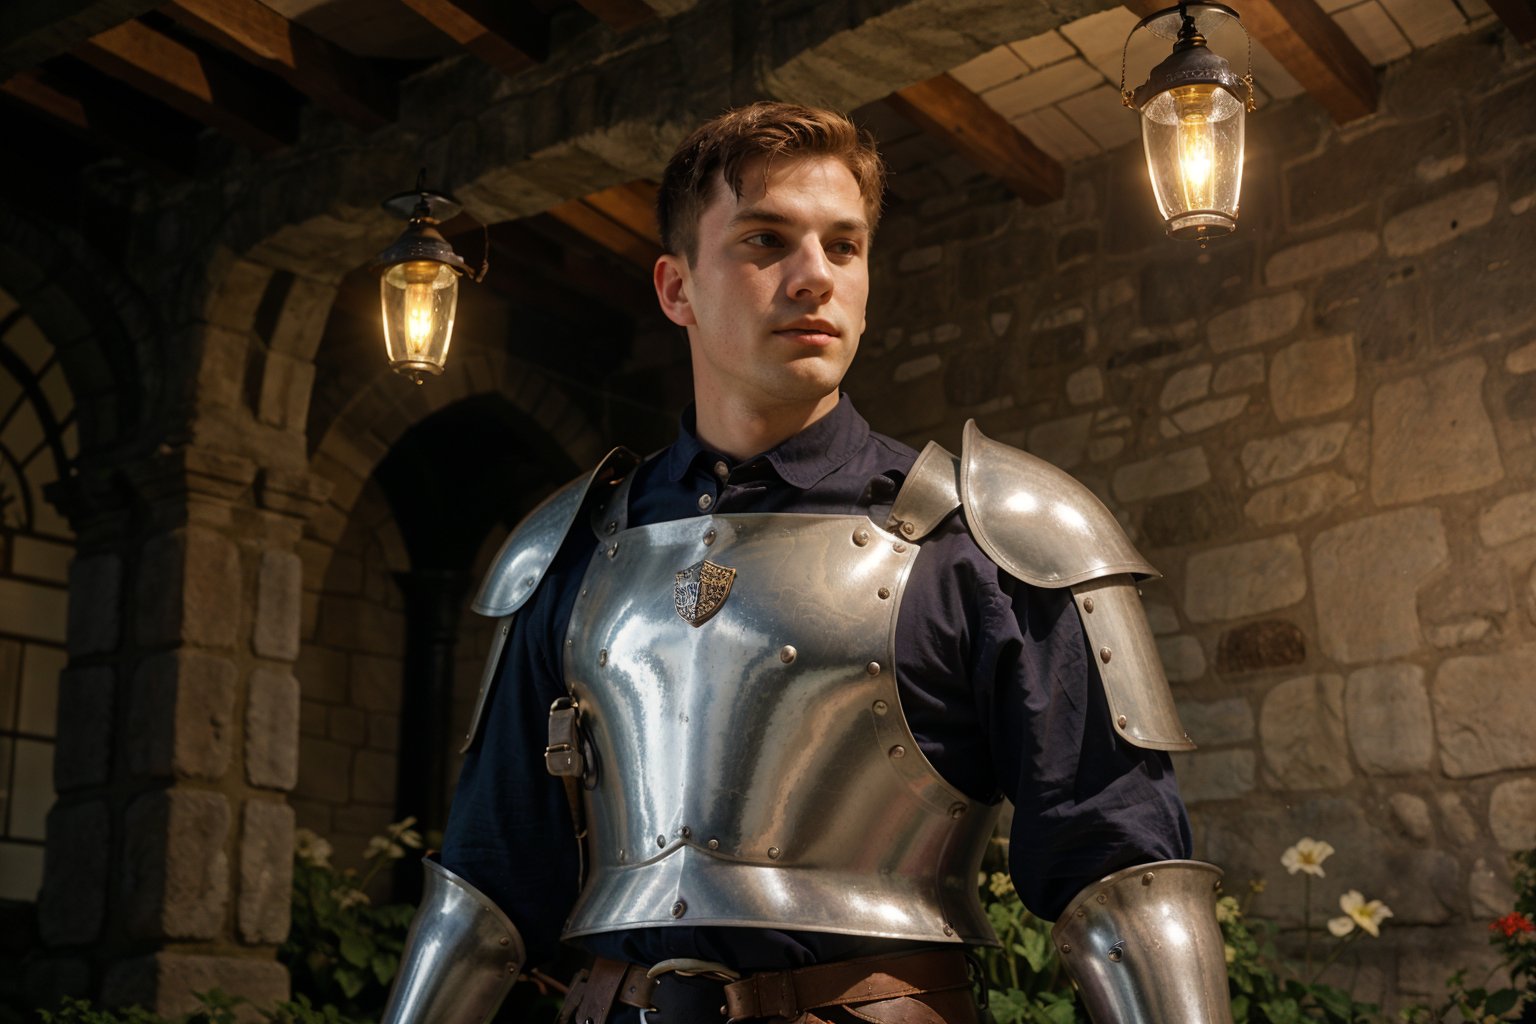 20 year old buff boy. gothic vibe. wears (steel knight medieval armour). location is (Medieval castle garden), ceiling long lamp lights. frontal flash light, 35mm, cinematic still. portra velvia provia